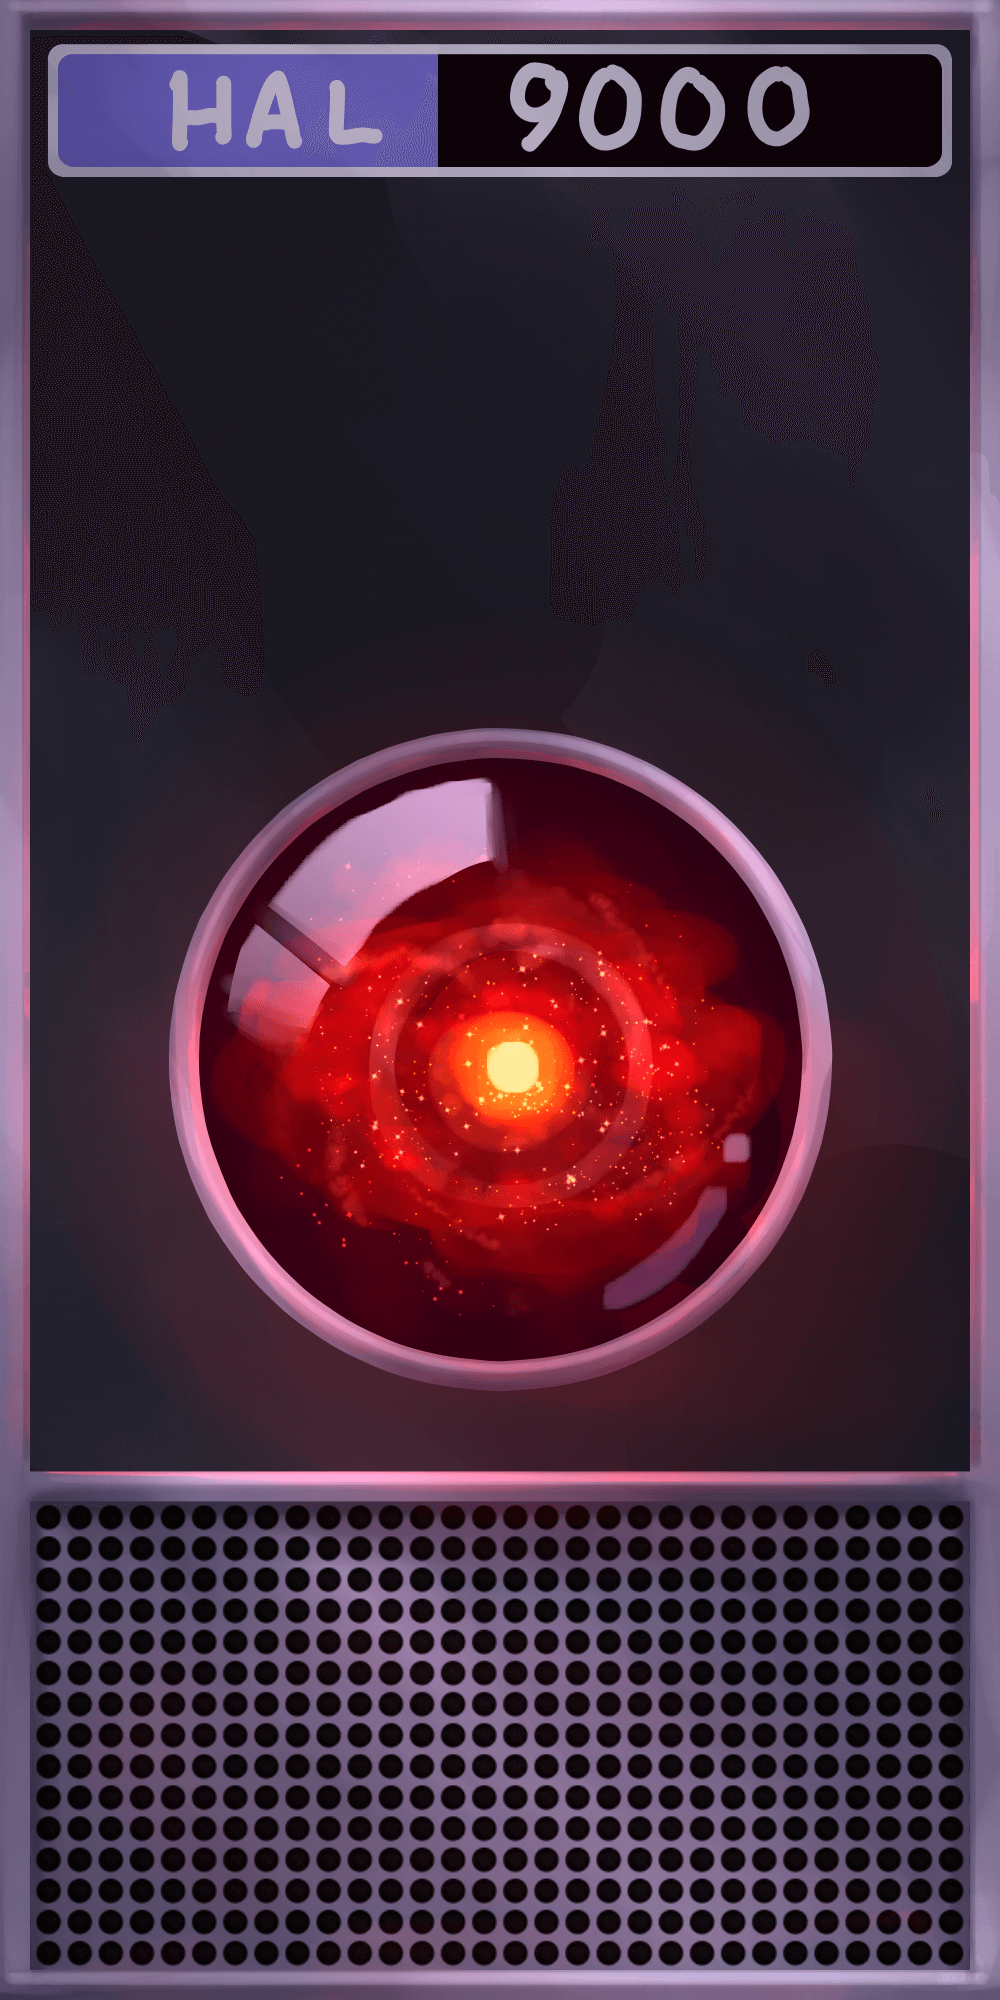 a drawing of hal 9000 from space odyssey. his faceplate takes up the entire
		canvas. in his lens, a red-tinted galaxy can be seen.